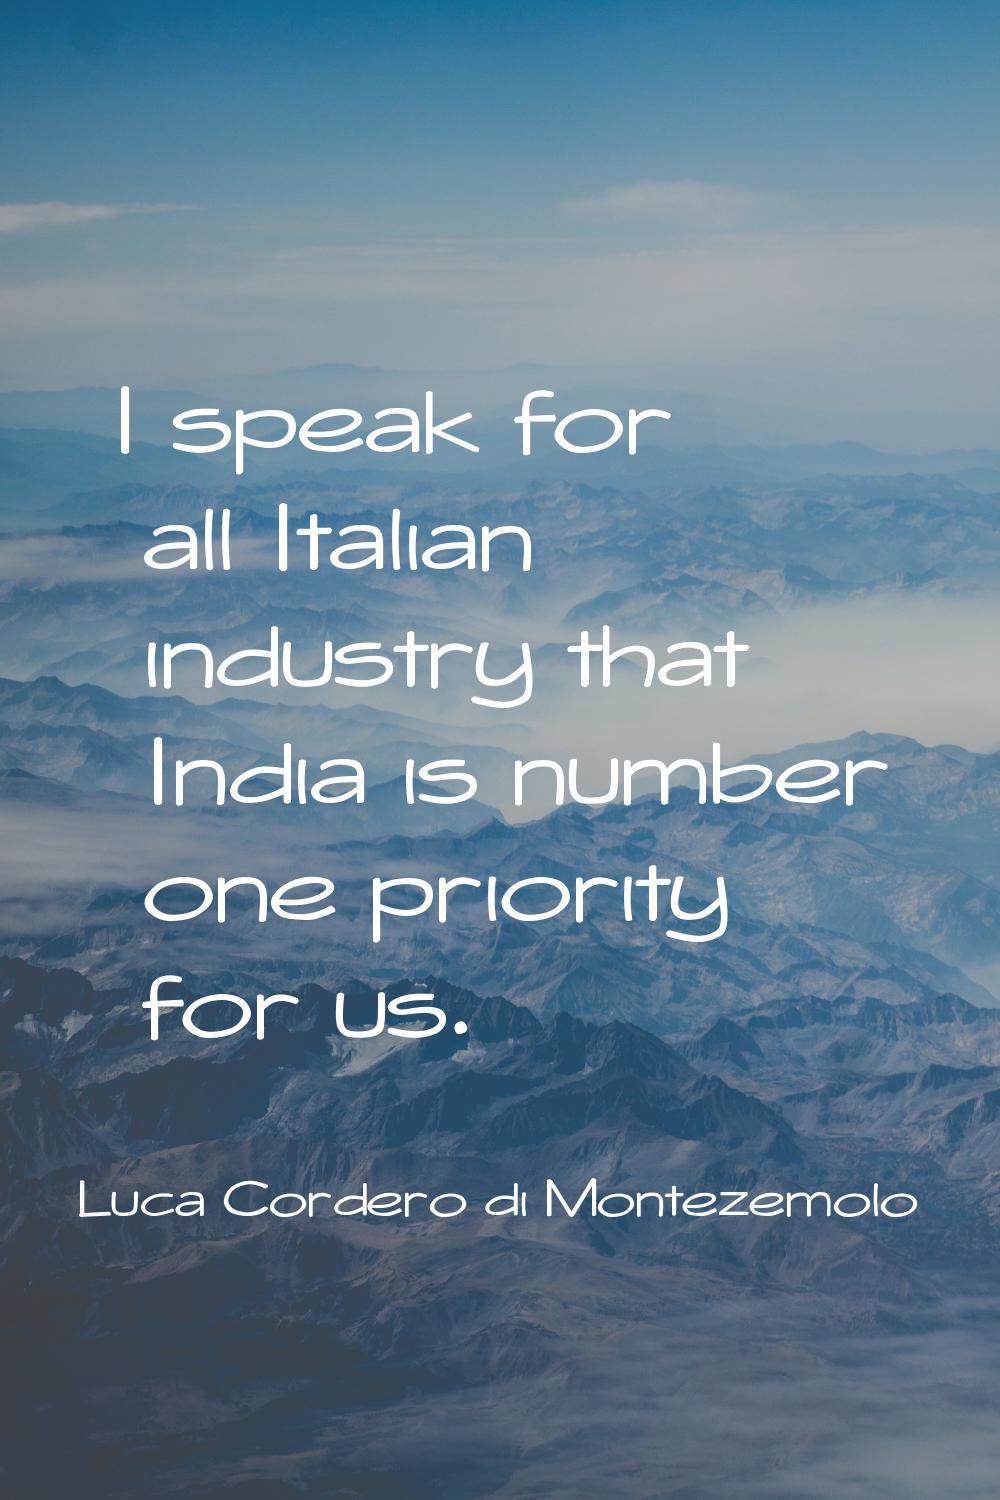 I speak for all Italian industry that India is number one priority for us.